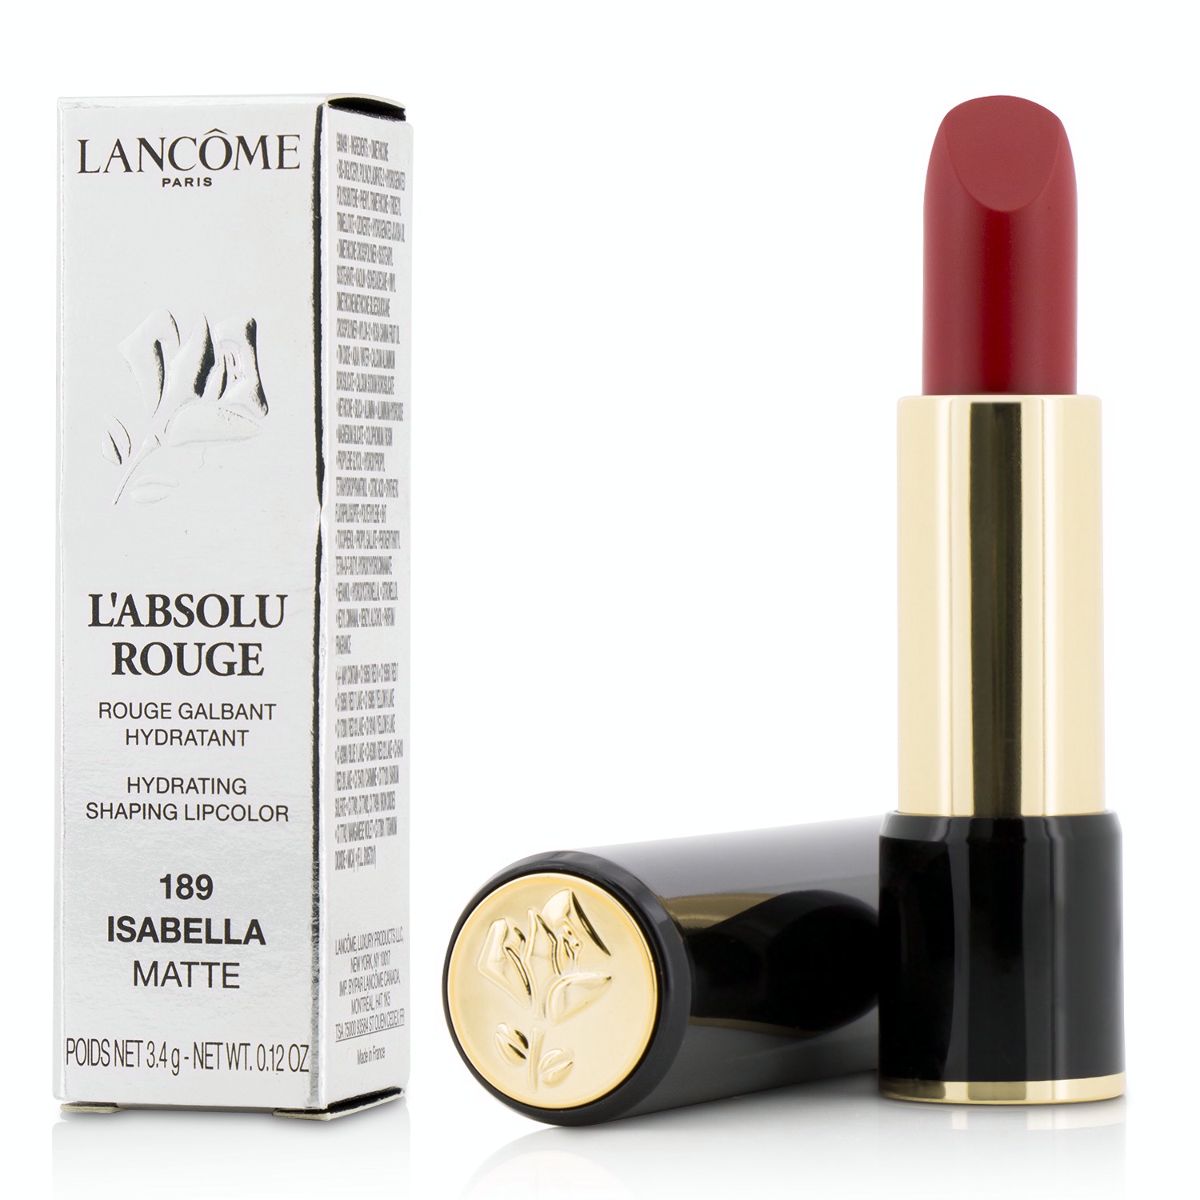 L Absolu Rouge Hydrating Shaping Lipcolor - # 189 Isabella (Matte) Lancome Image